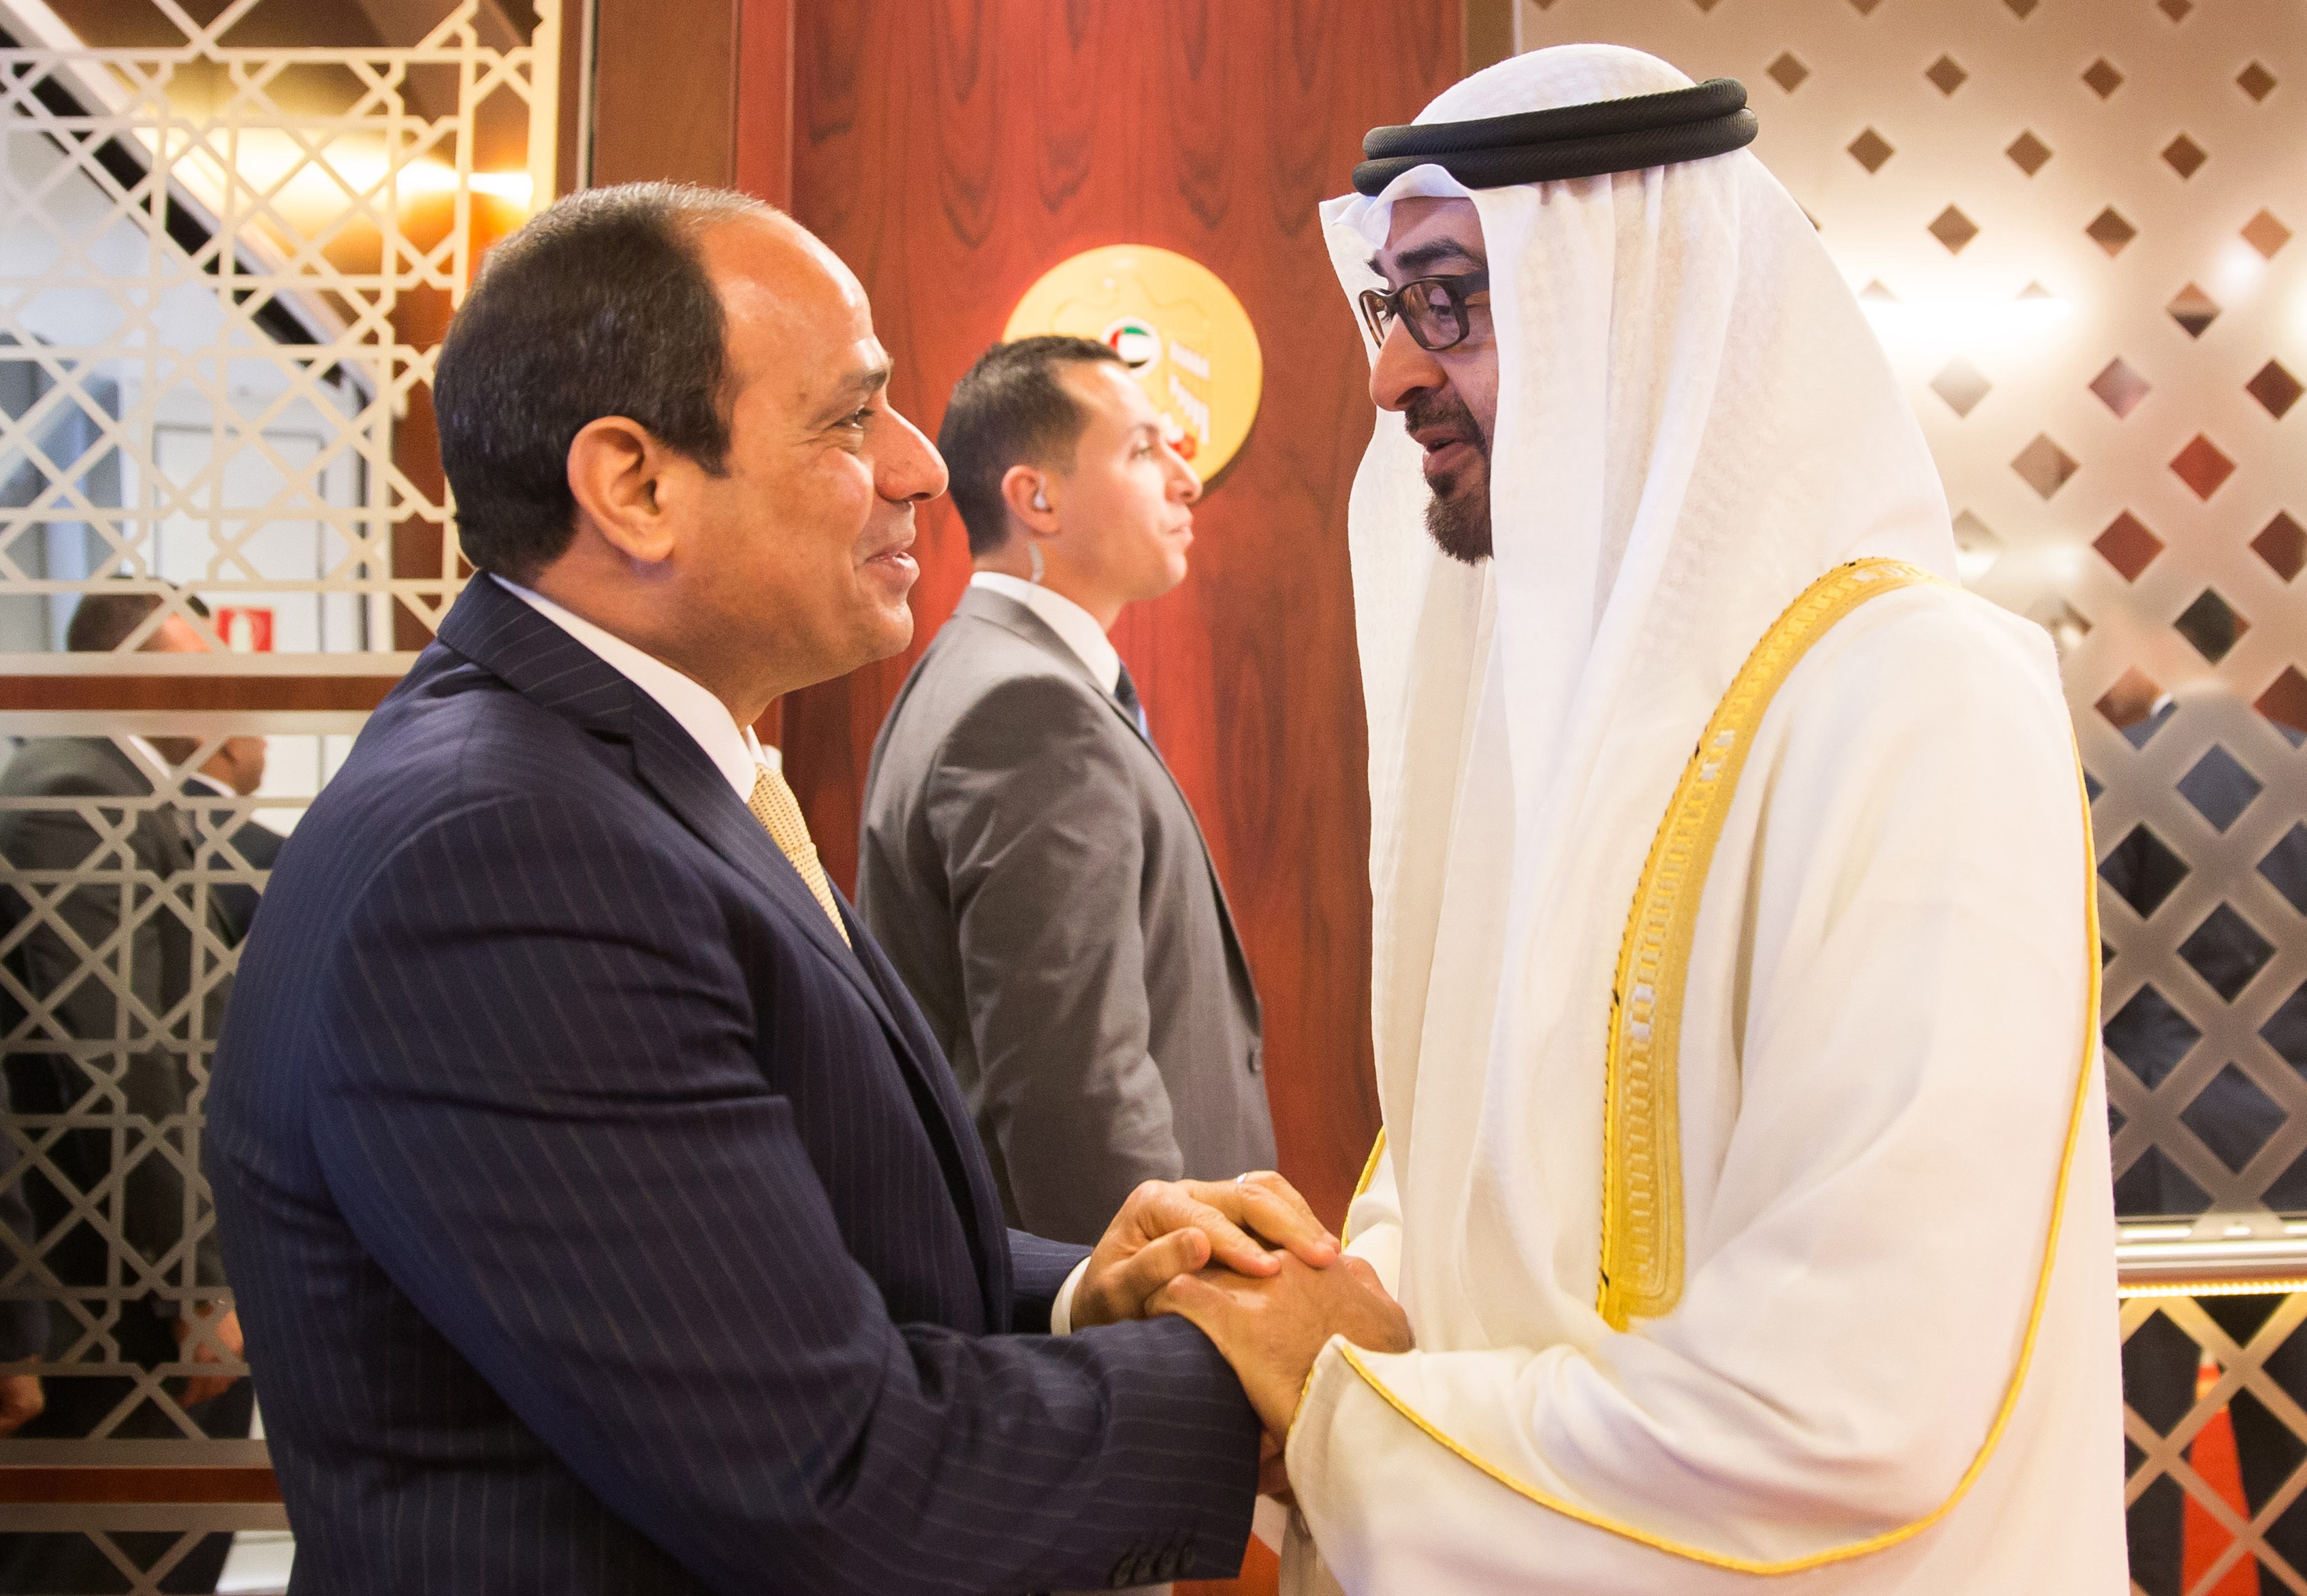 Sheikh Mohamed bin Zayed Al Nahyan Crown Prince of Abu Dhabi and Deputy Supreme Commander of the UAE Armed Forces (R) receiving Egyptian President Abdel Fattah al-Sisi in the Emirati capital